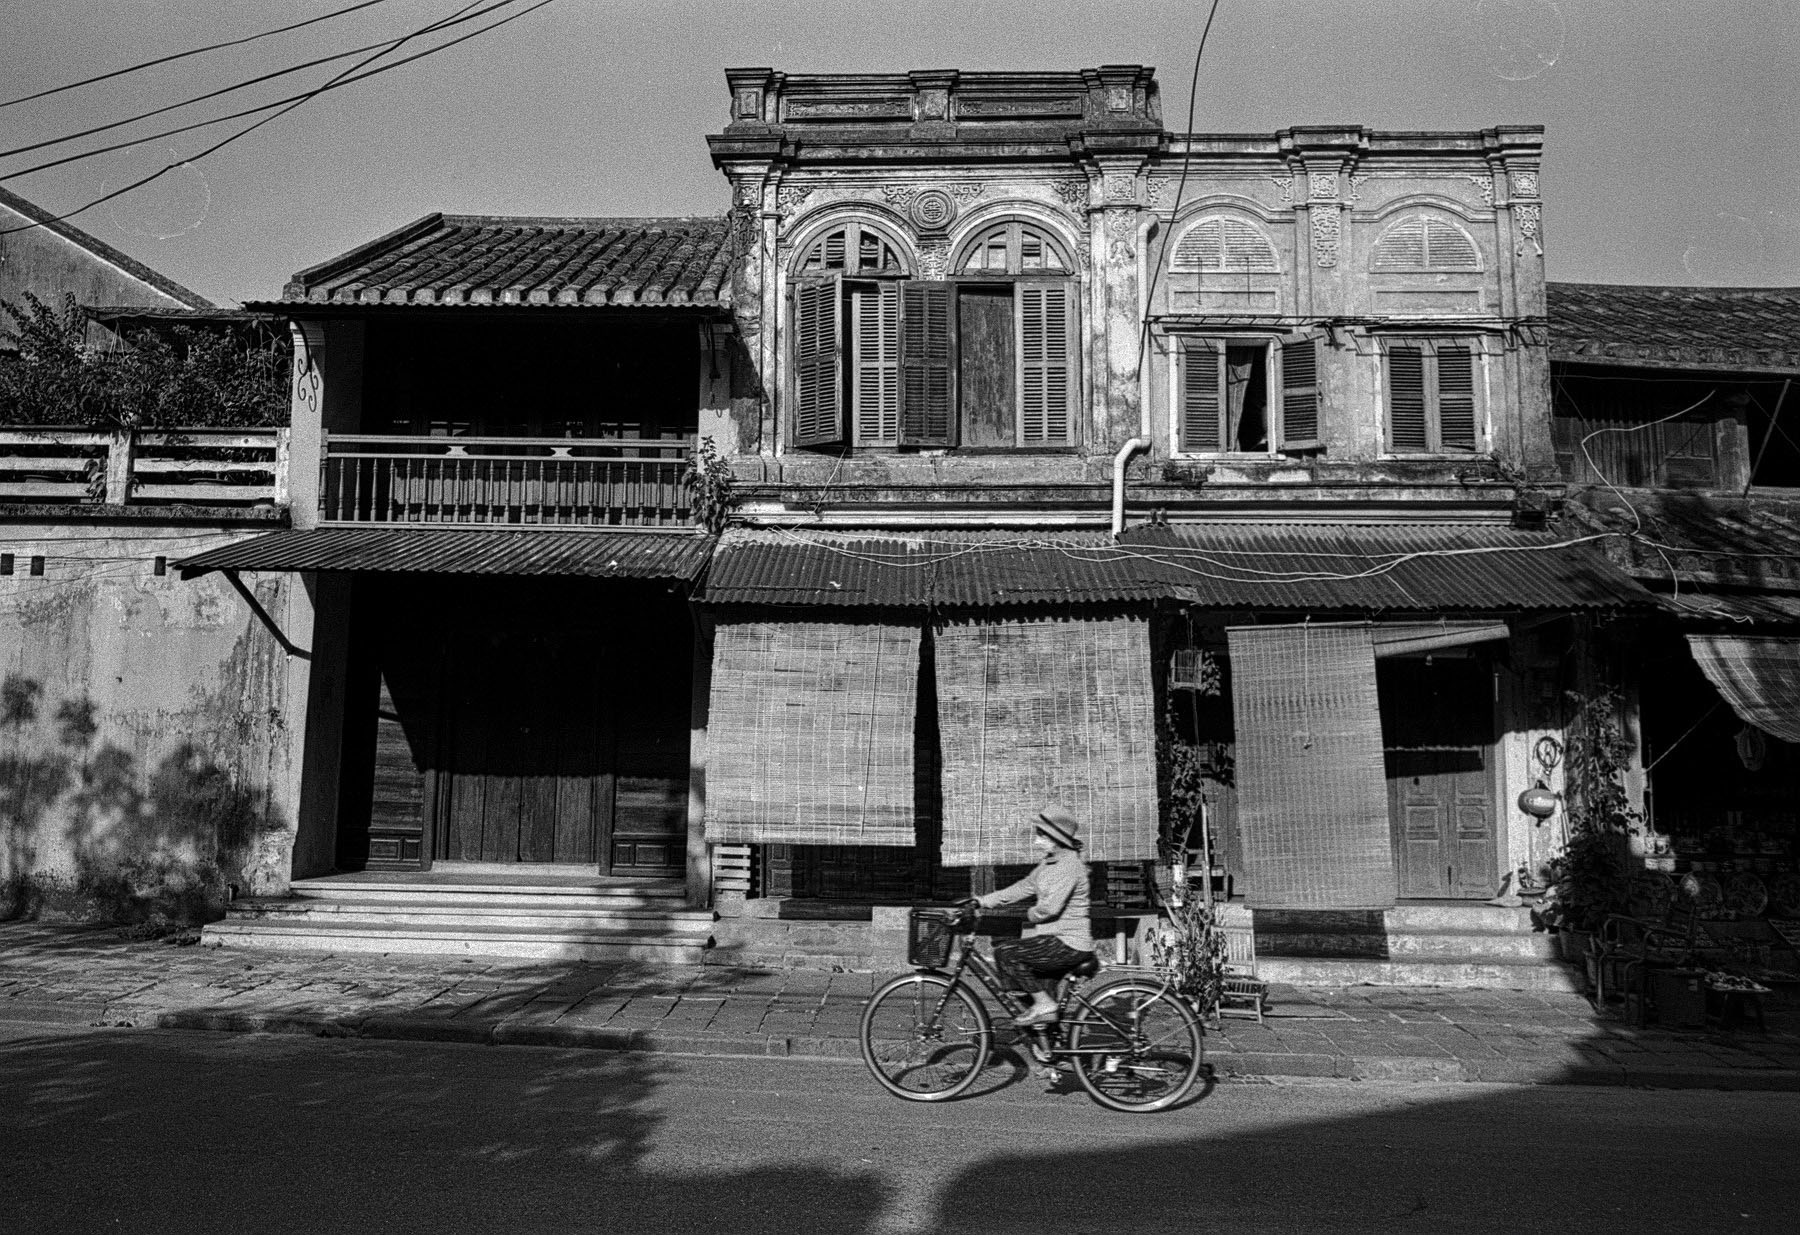 Dismounted cyclist and old buildings (Pic: Lester Ledesma)